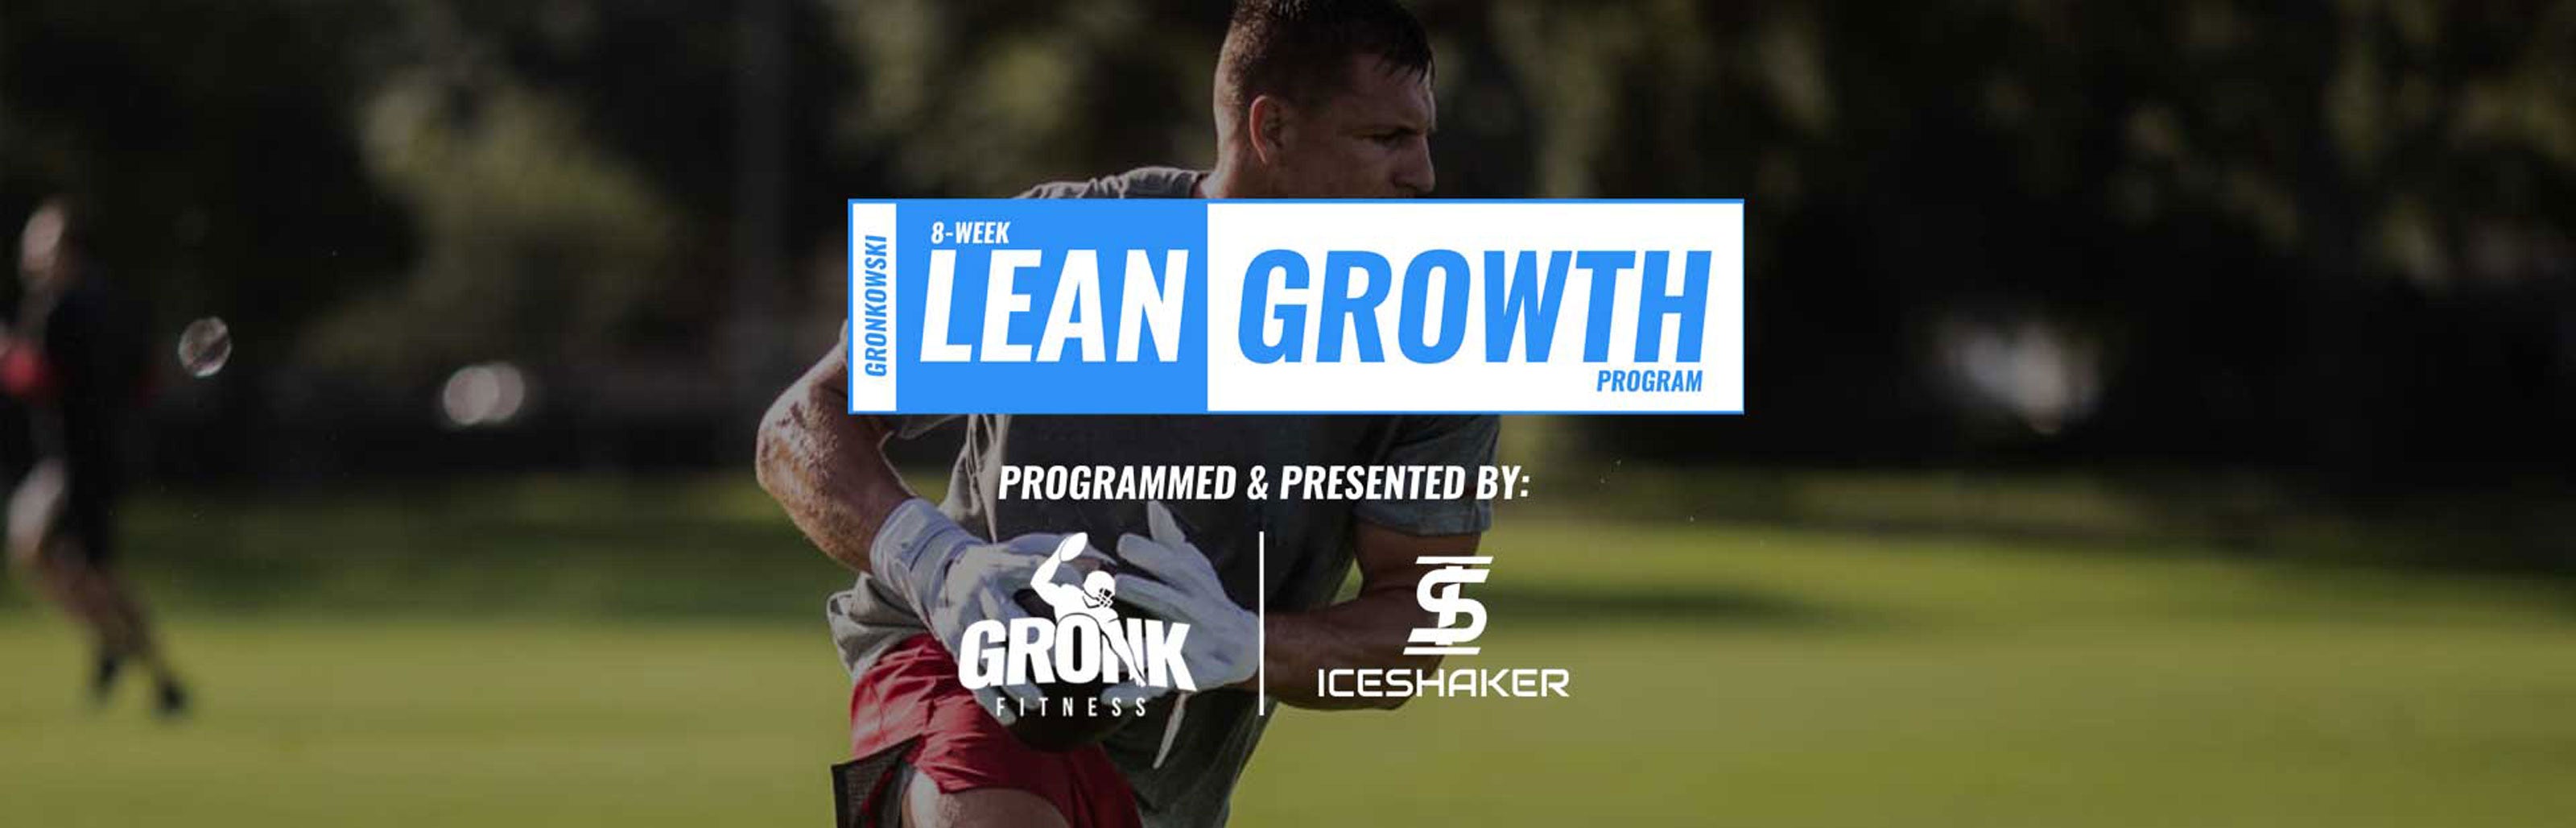 A banner takes up the entire length of the top of the screen. It contains an image of NFL player, Rob Gronkowski holding tightly onto a football while he runs down a field. The 8-Week Lean Growth Program logo is overlayed on the image. The 8-Week Lean Growth Program is Programmed and Presented By: Gronk Fitness and Ice Shaker